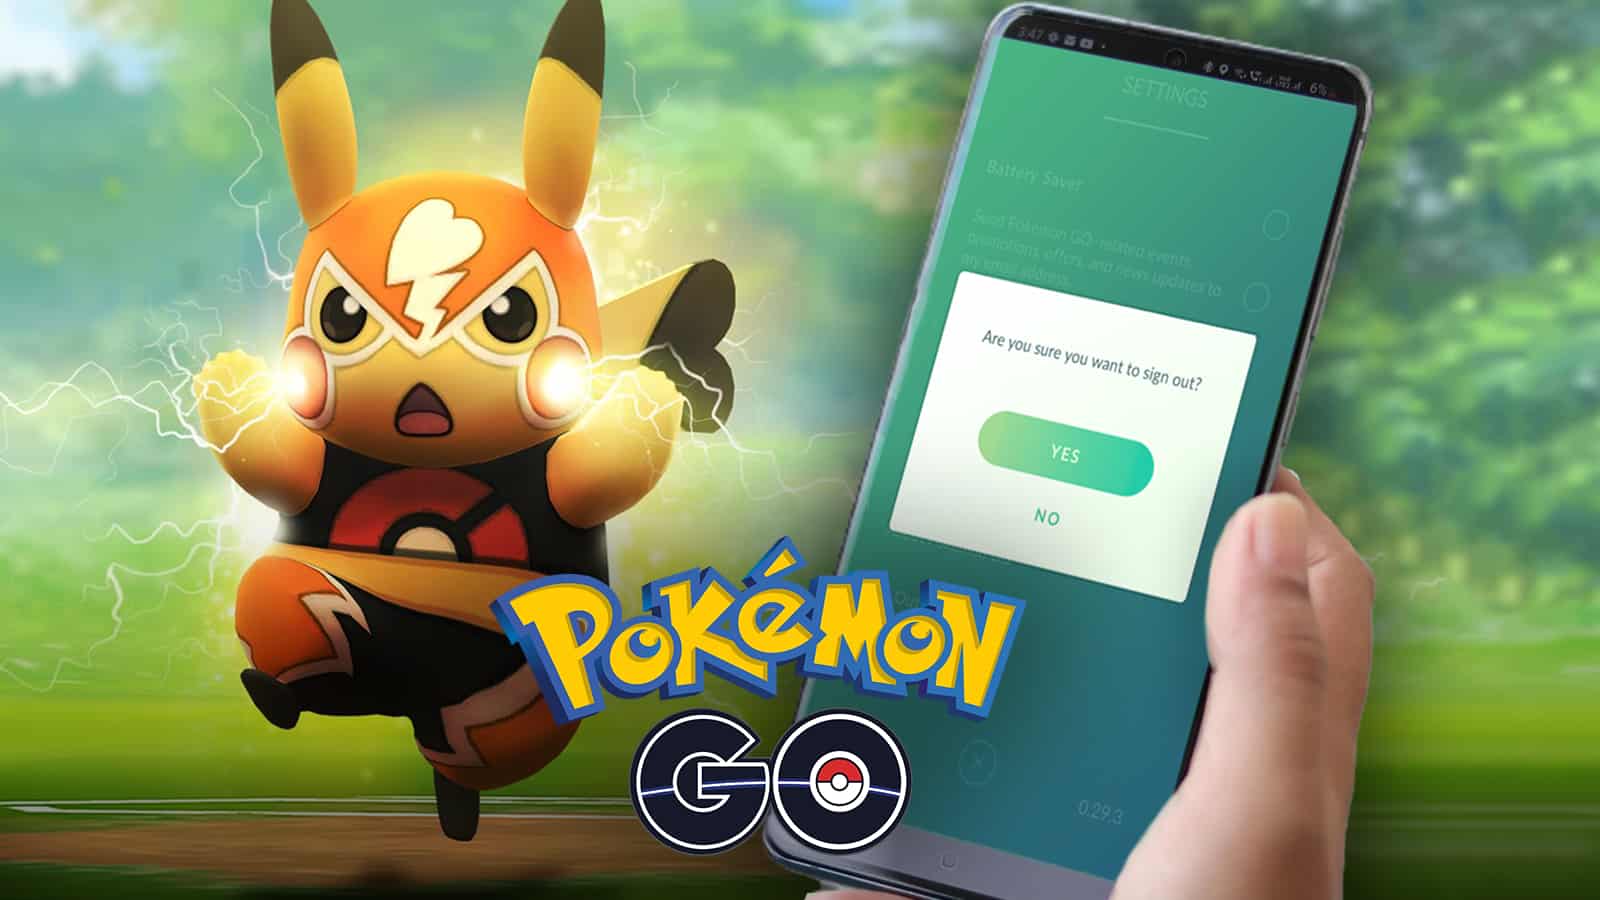 Pokemon Go players are boycotting in Pokemon NO Day over Niantic changes.